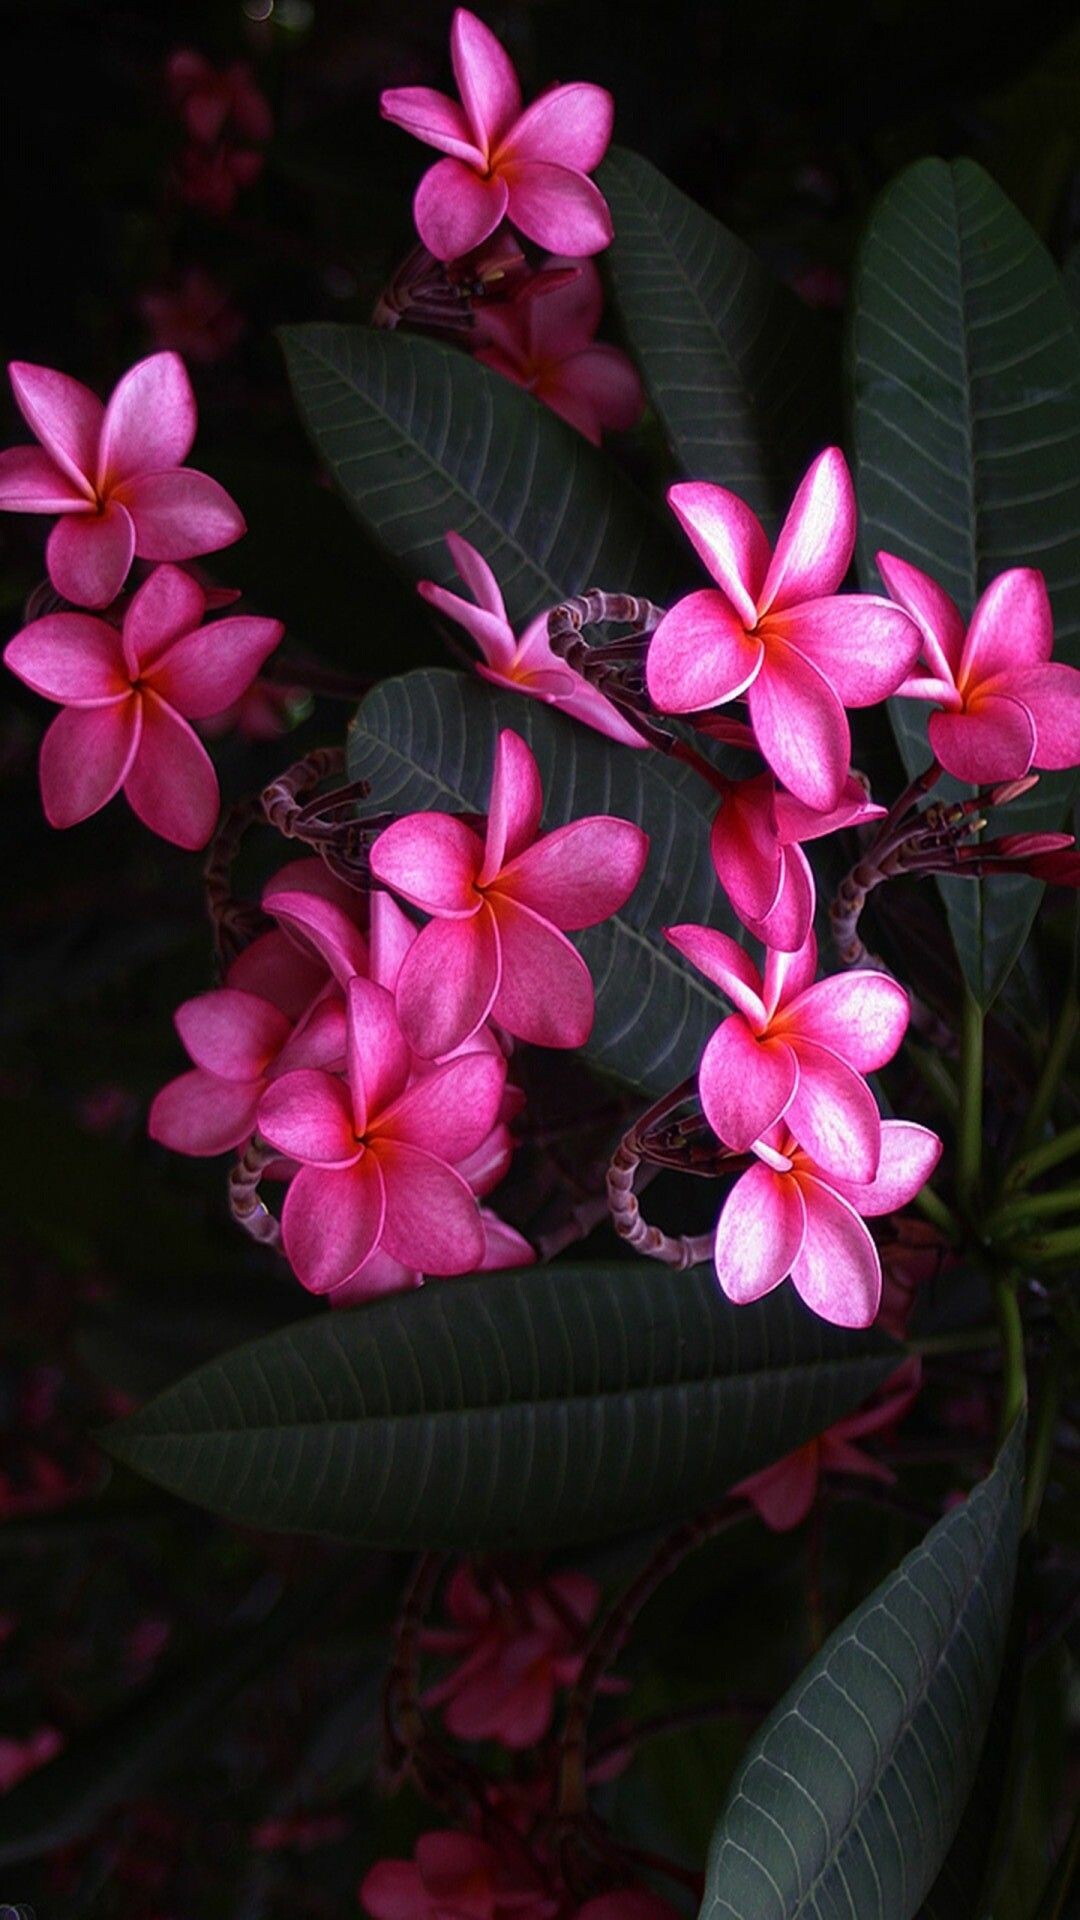 Frangipani Flower: A genus of flowering plants that are a proud member of the apocynaceae botanical family, which is more commonly known as the dogbane family. 1080x1920 Full HD Wallpaper.